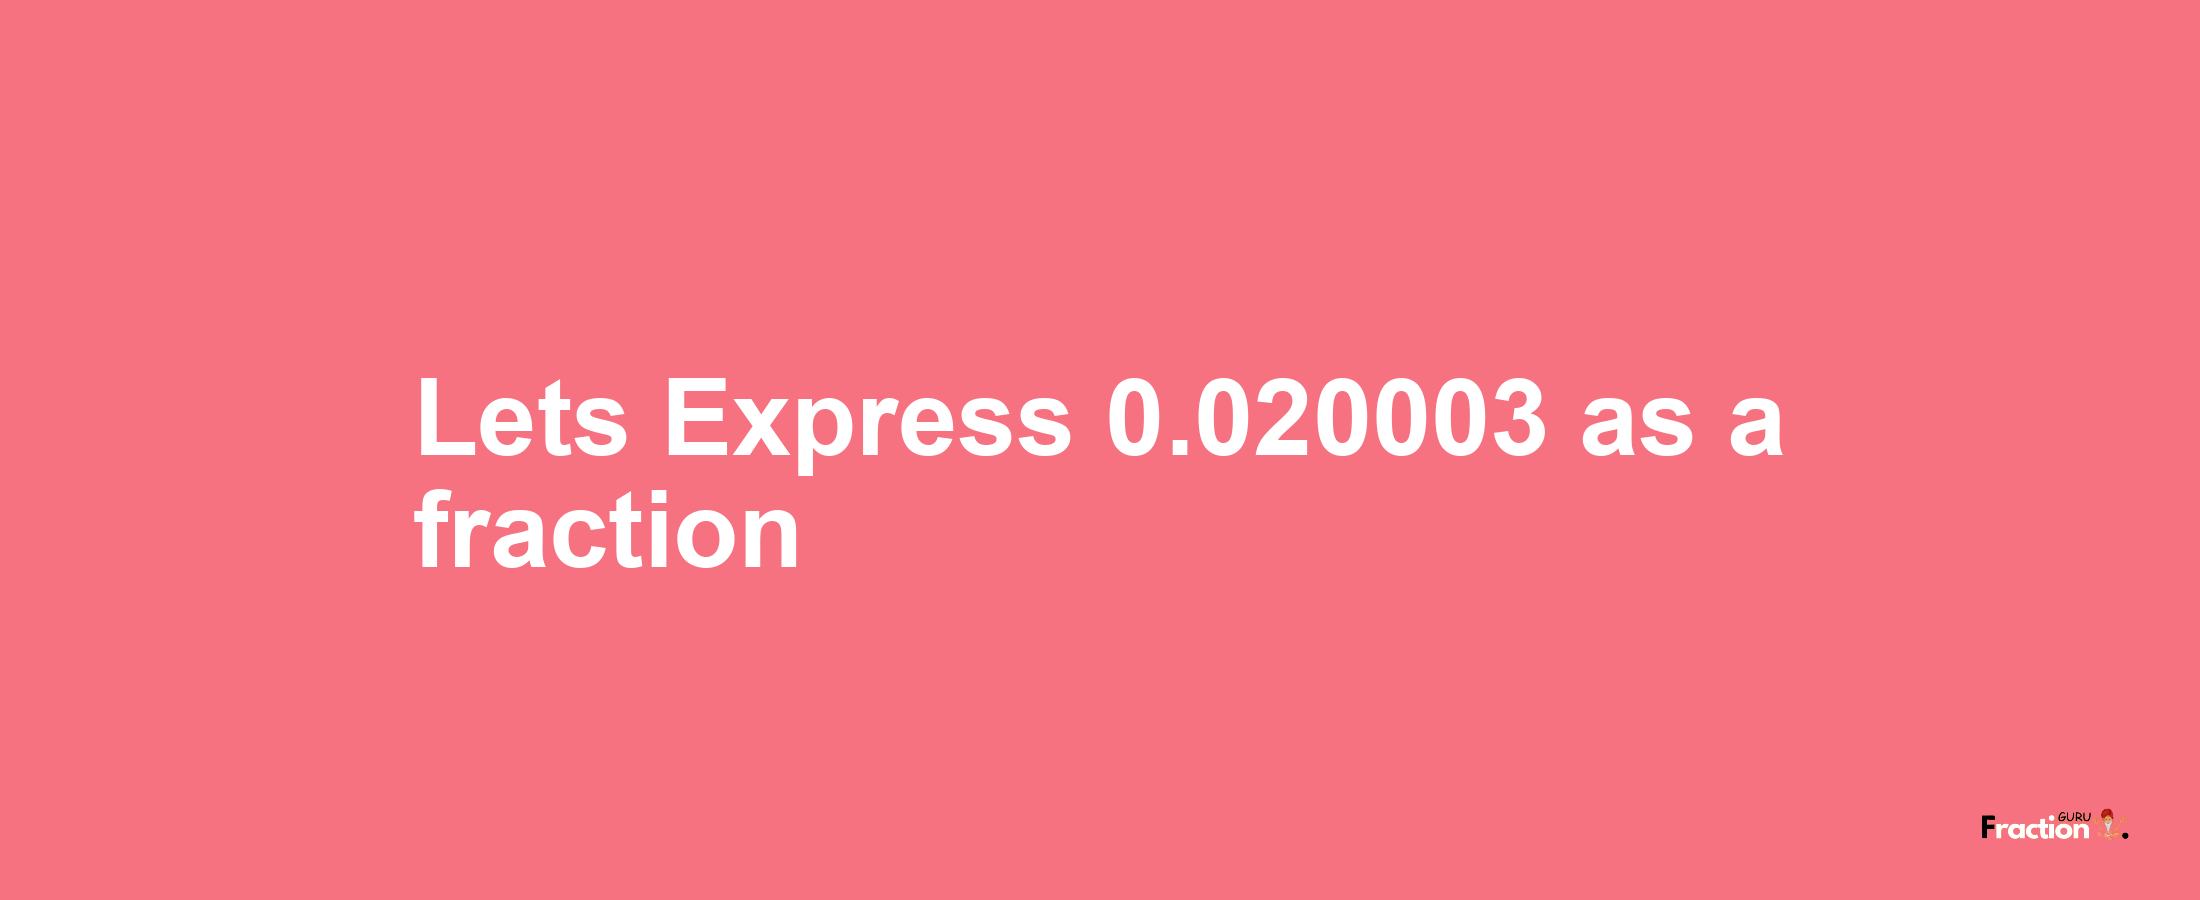 Lets Express 0.020003 as afraction